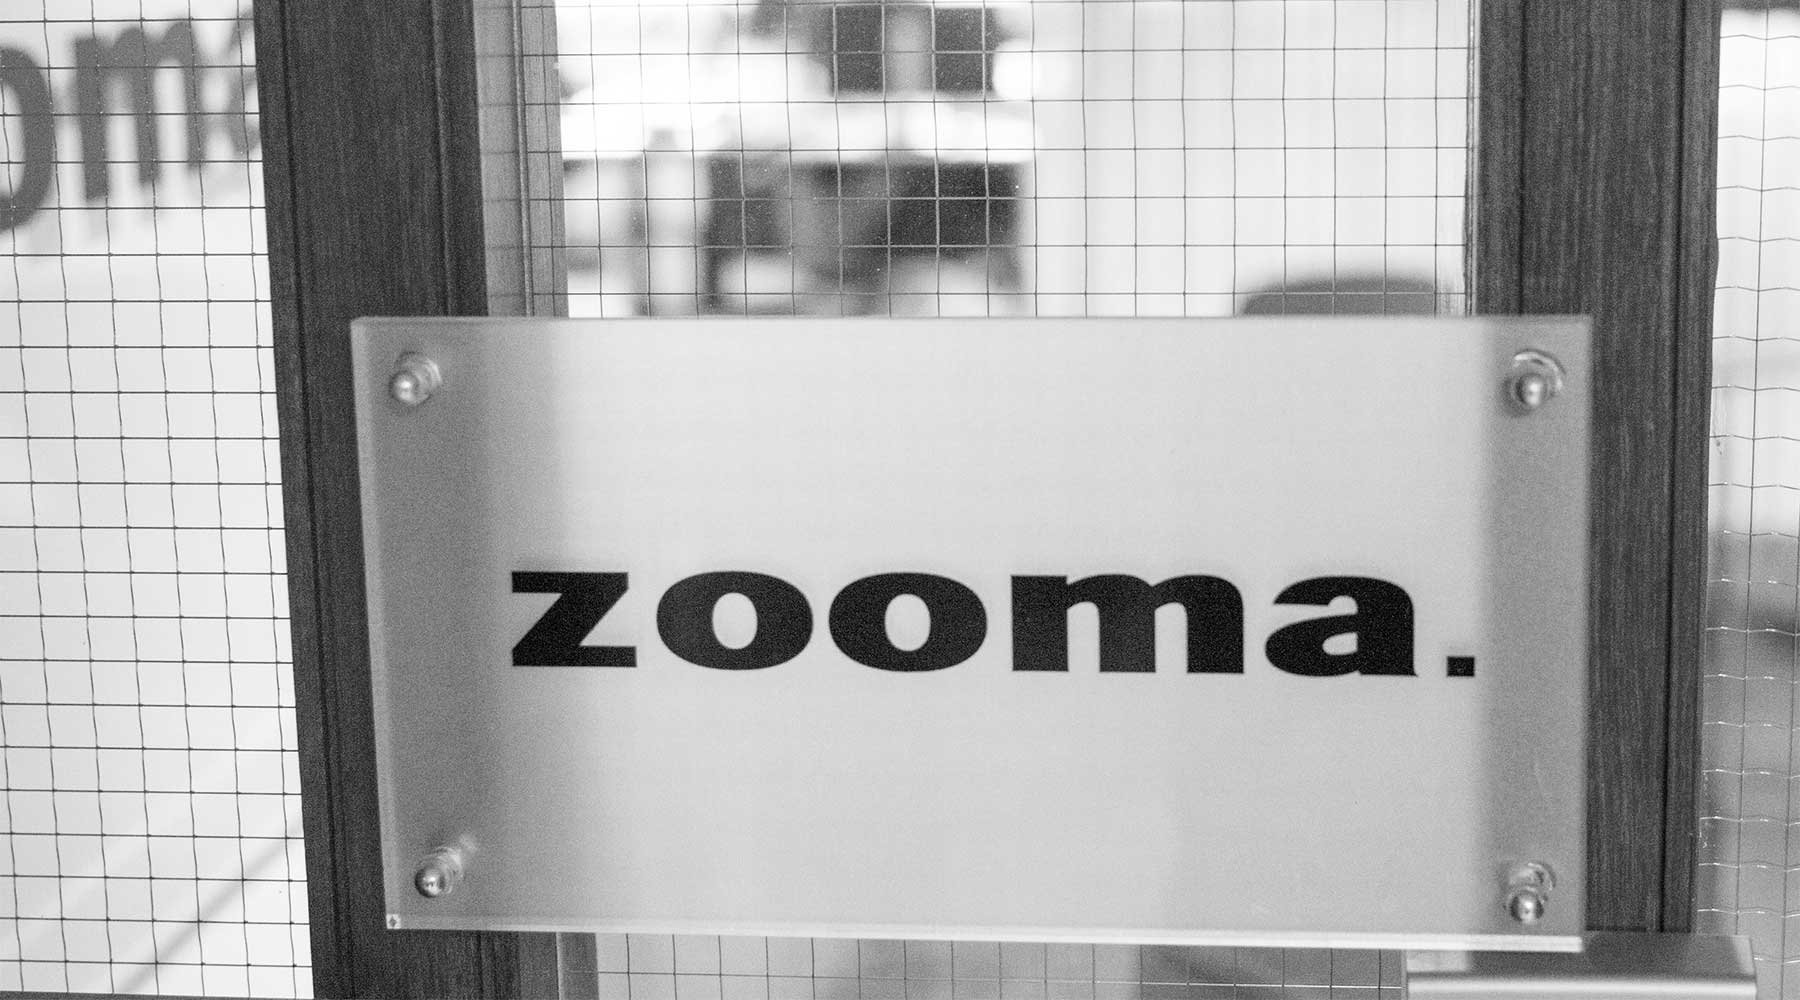 Today Zooma was founded!